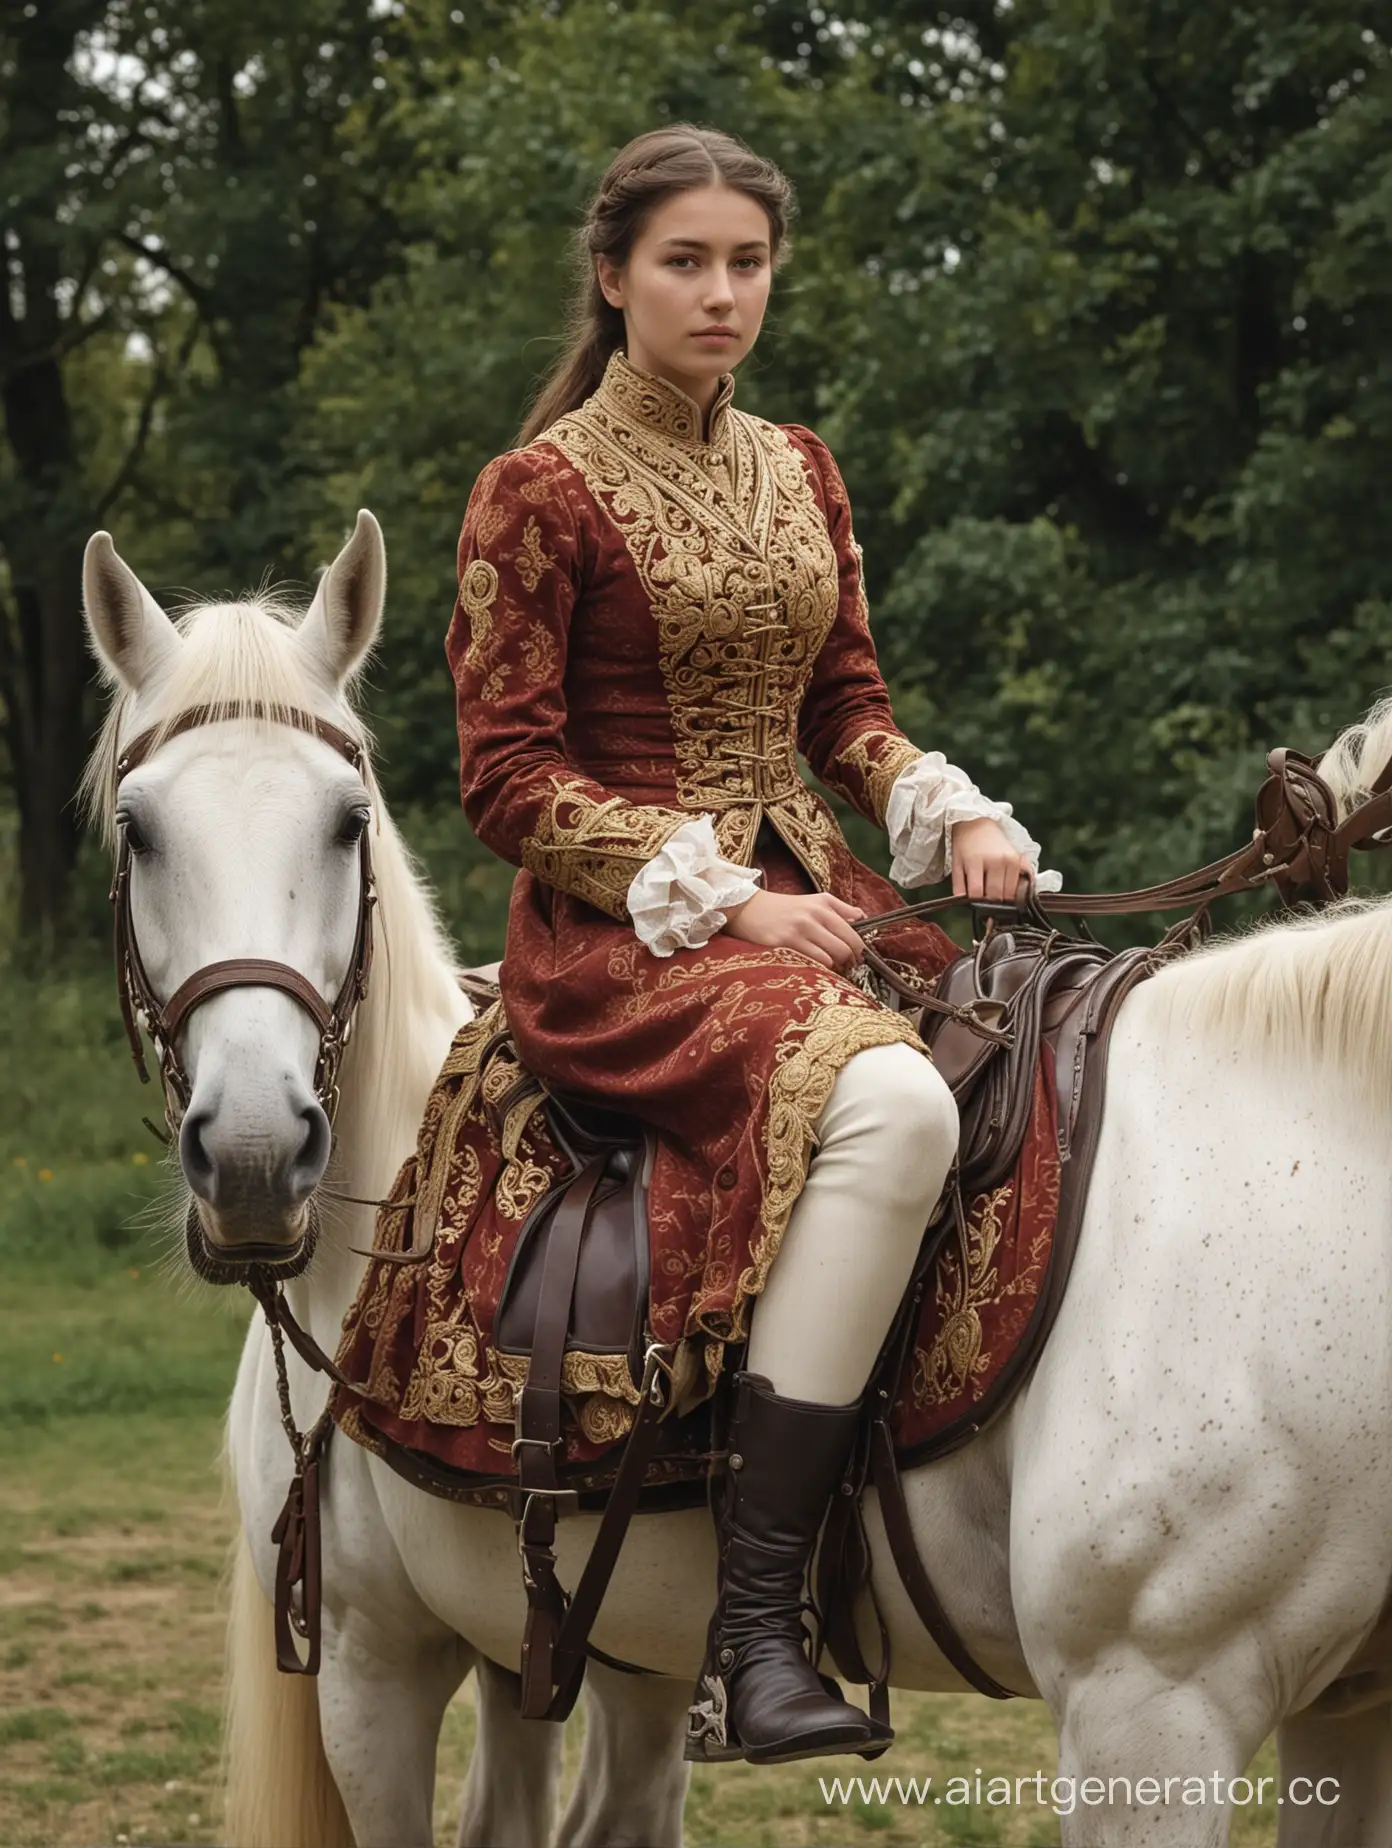 Young-Girl-in-Vintage-Dress-Riding-Horse-with-Two-Hussars